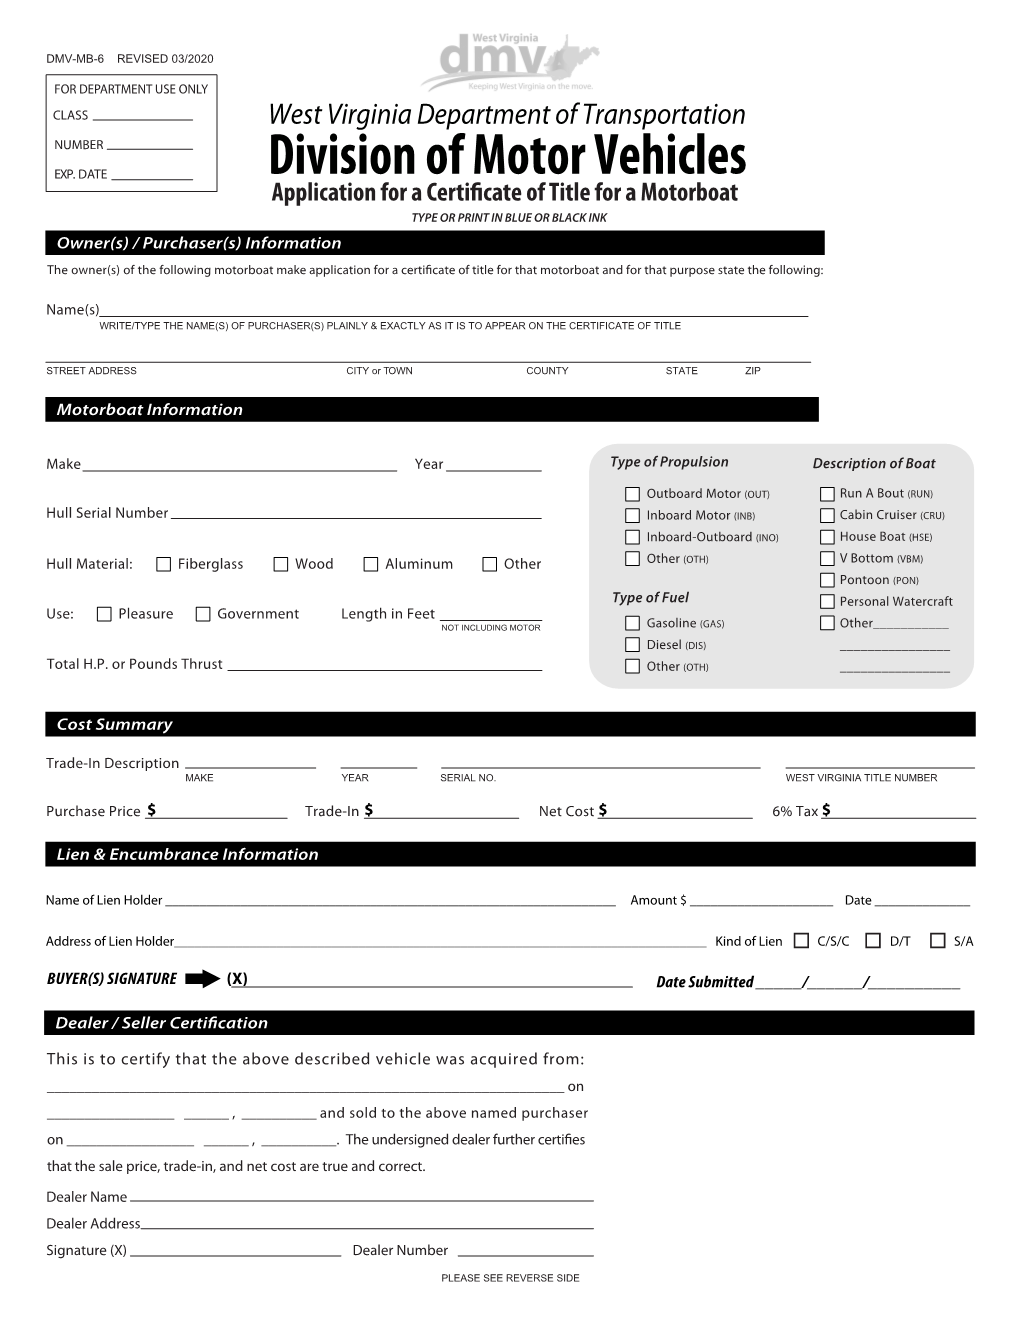 Application for a Certificate of Title for a Motor Boat